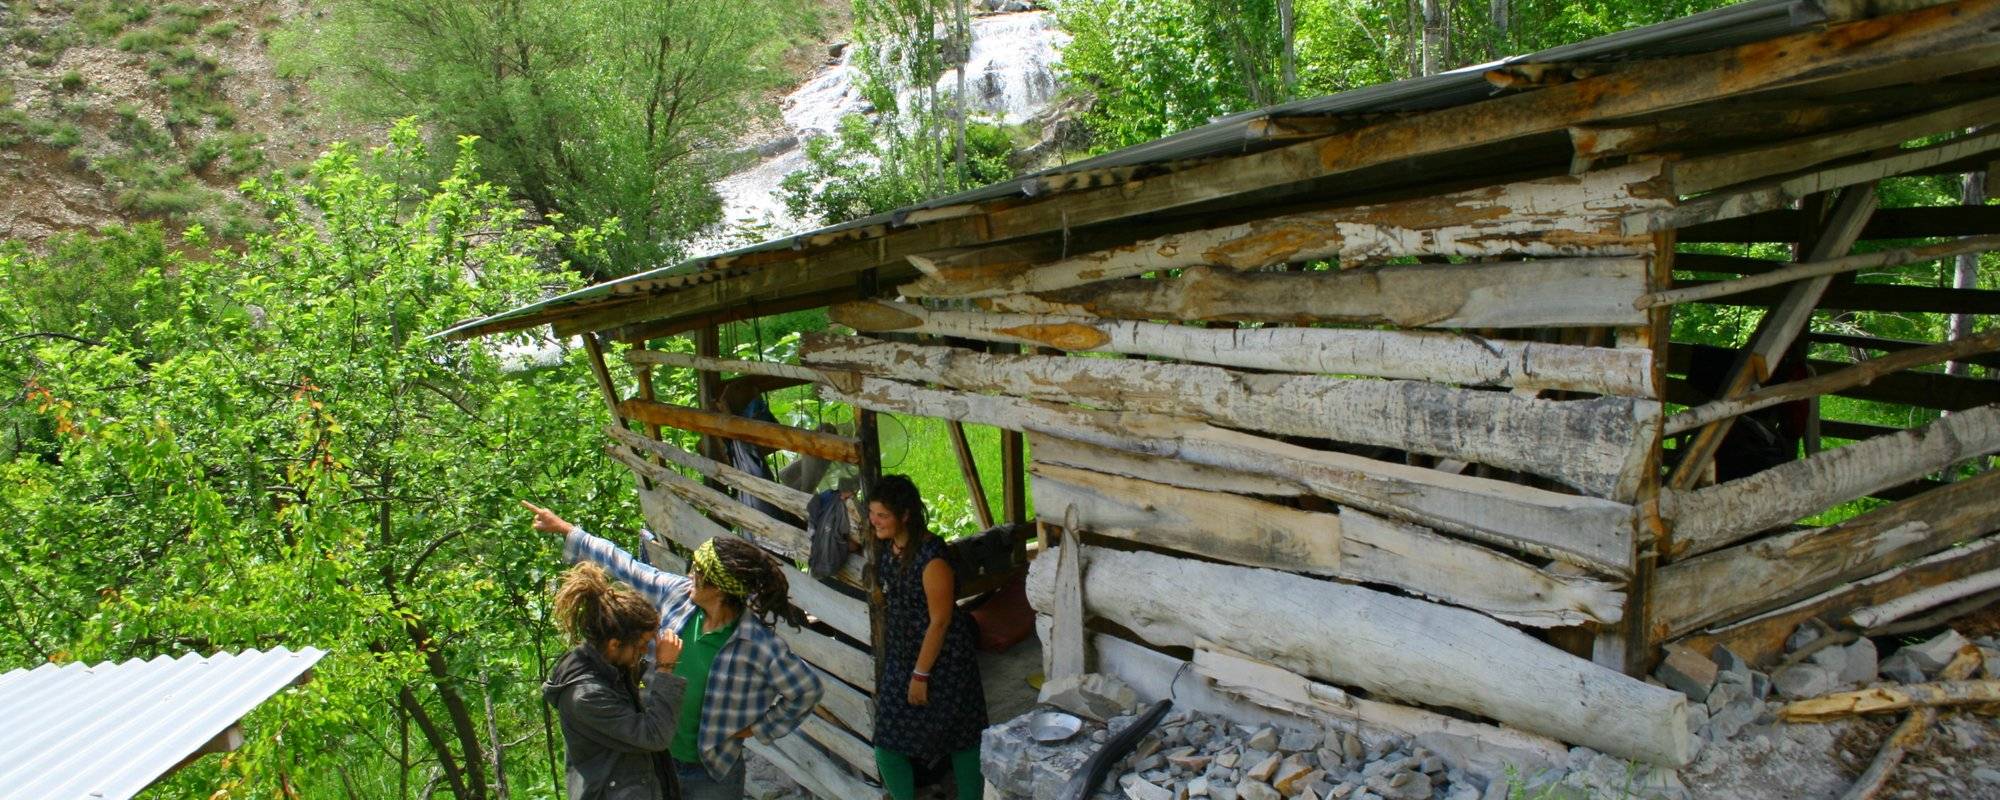 "Our" Beautiful (squatted) House by the Waterfall! - The story about the traveling band Caspian Caravan and the Journey Over Land to India Part 11